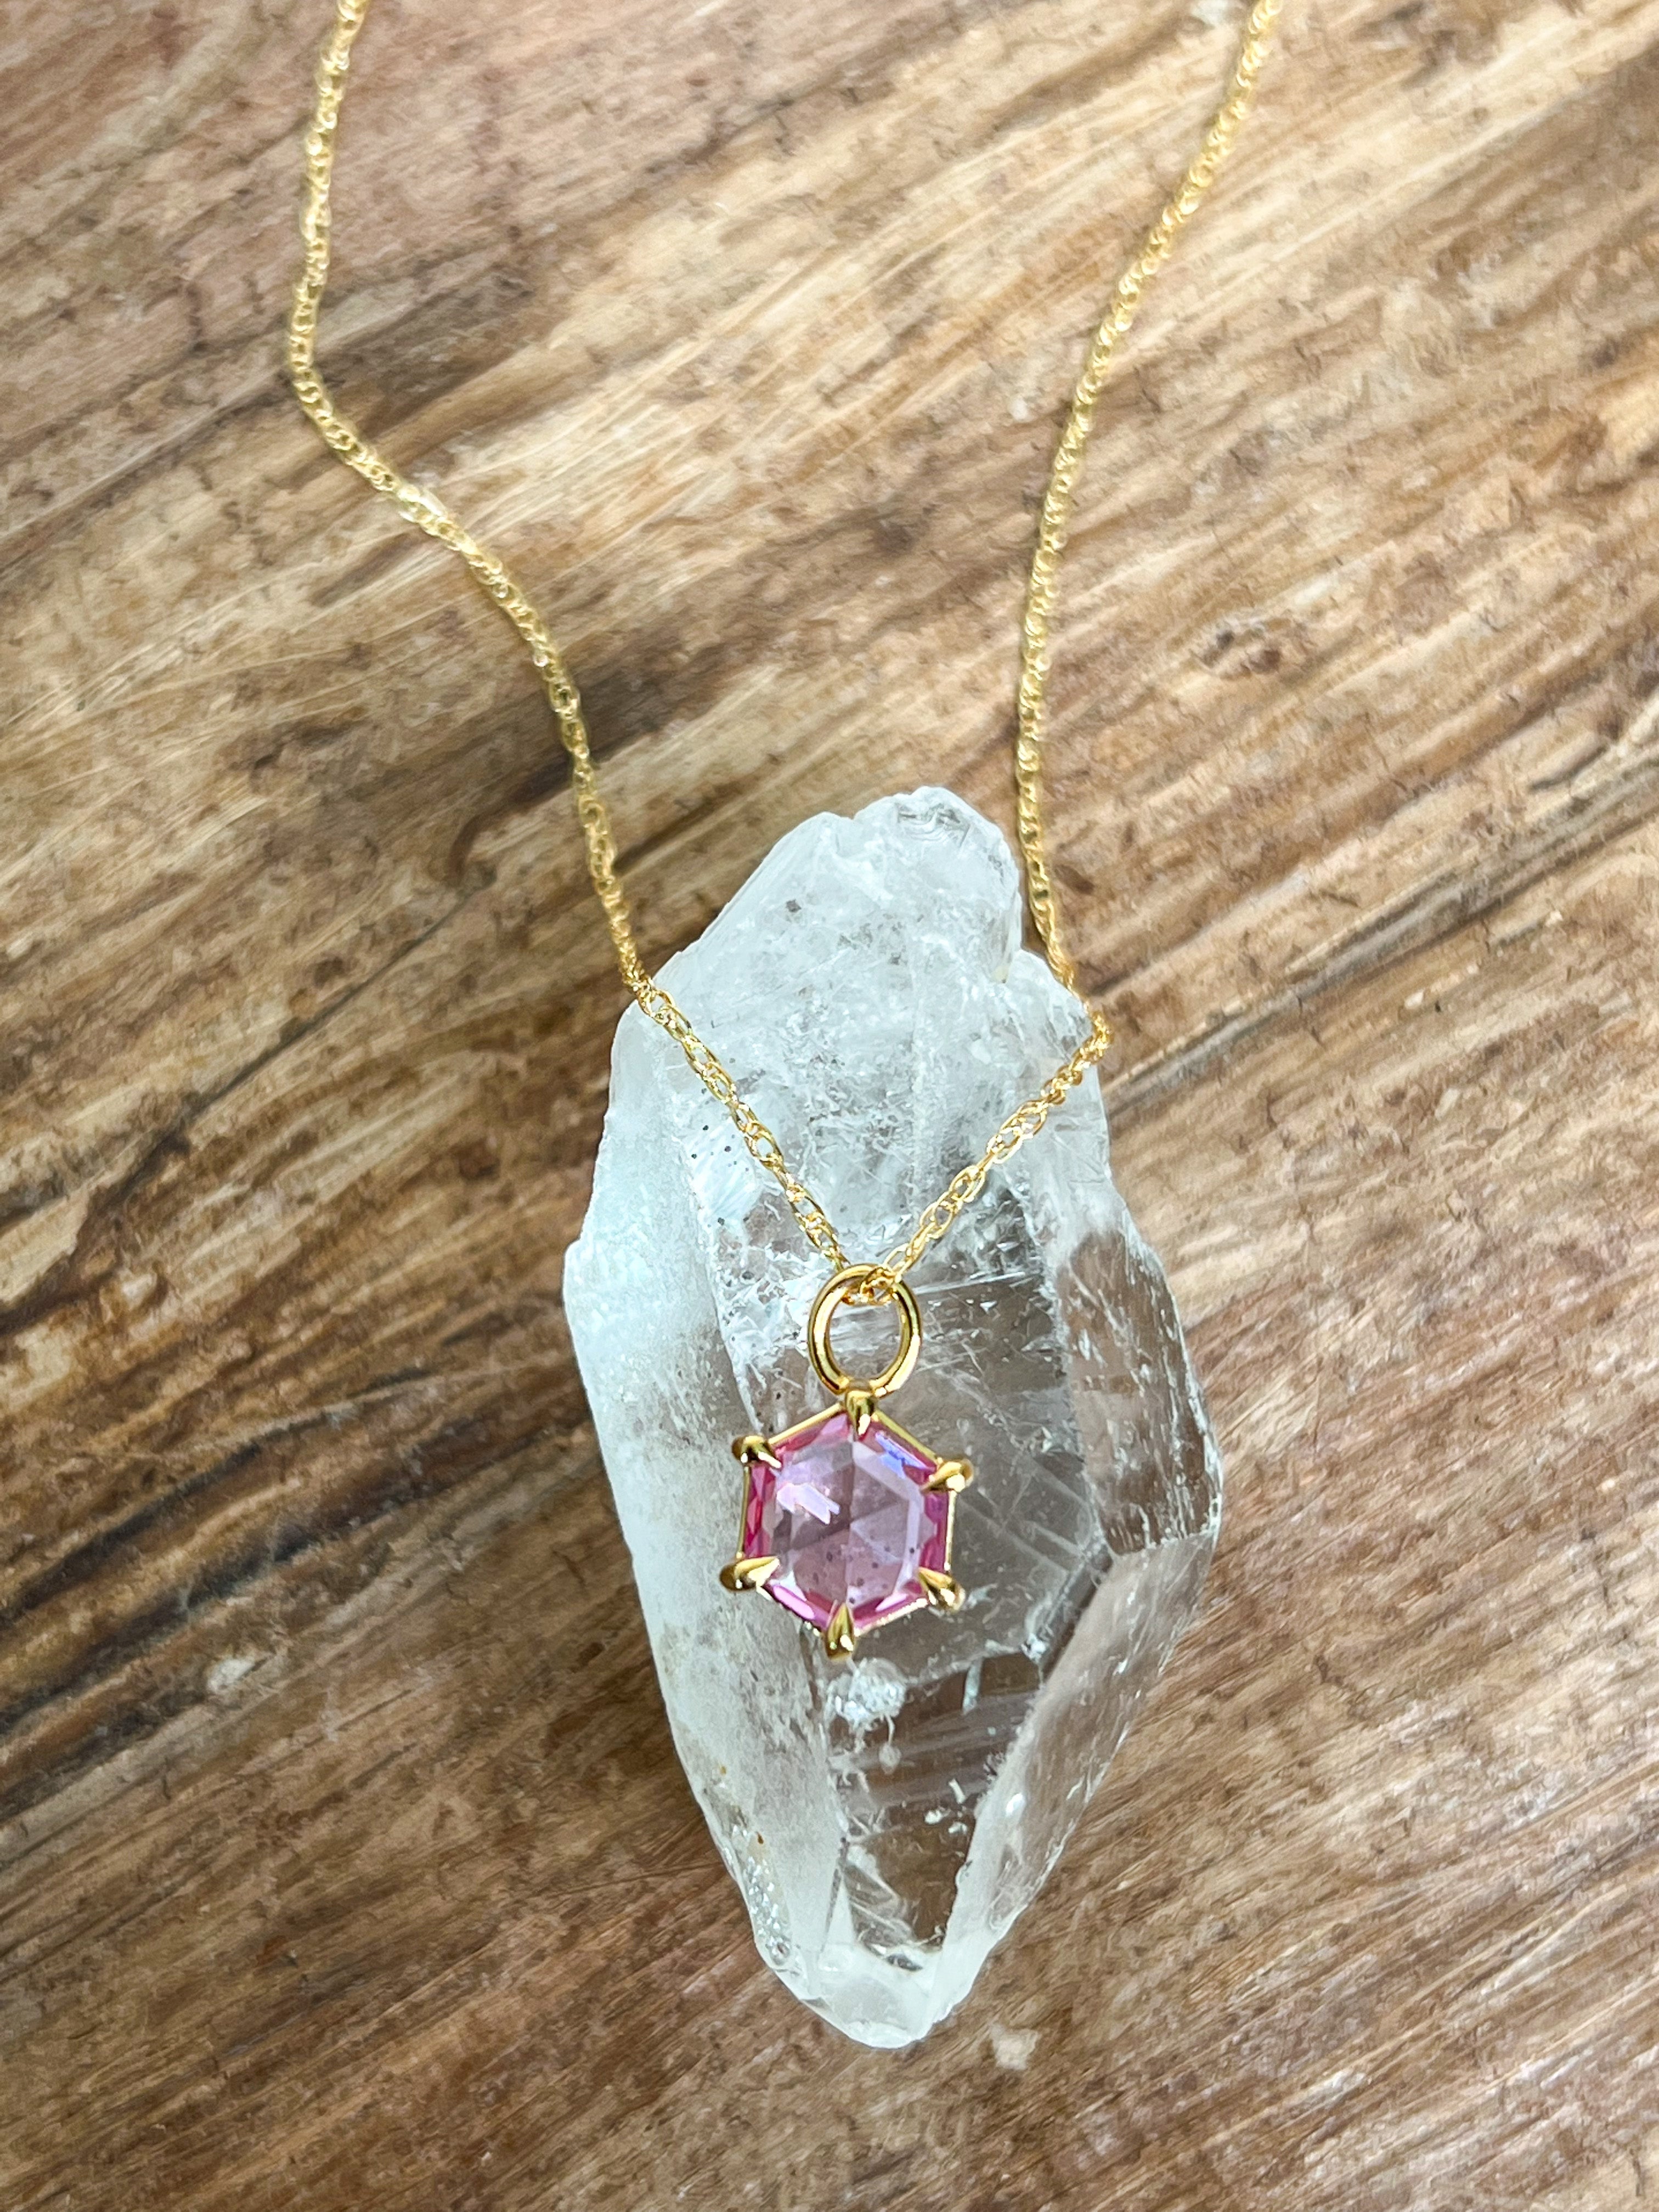 a close up shot of the gemstone pendant necklace in gold and pink spinel draped over a clear crystal. The spinel is a rose cut hexagonal shape on a delicate chain.